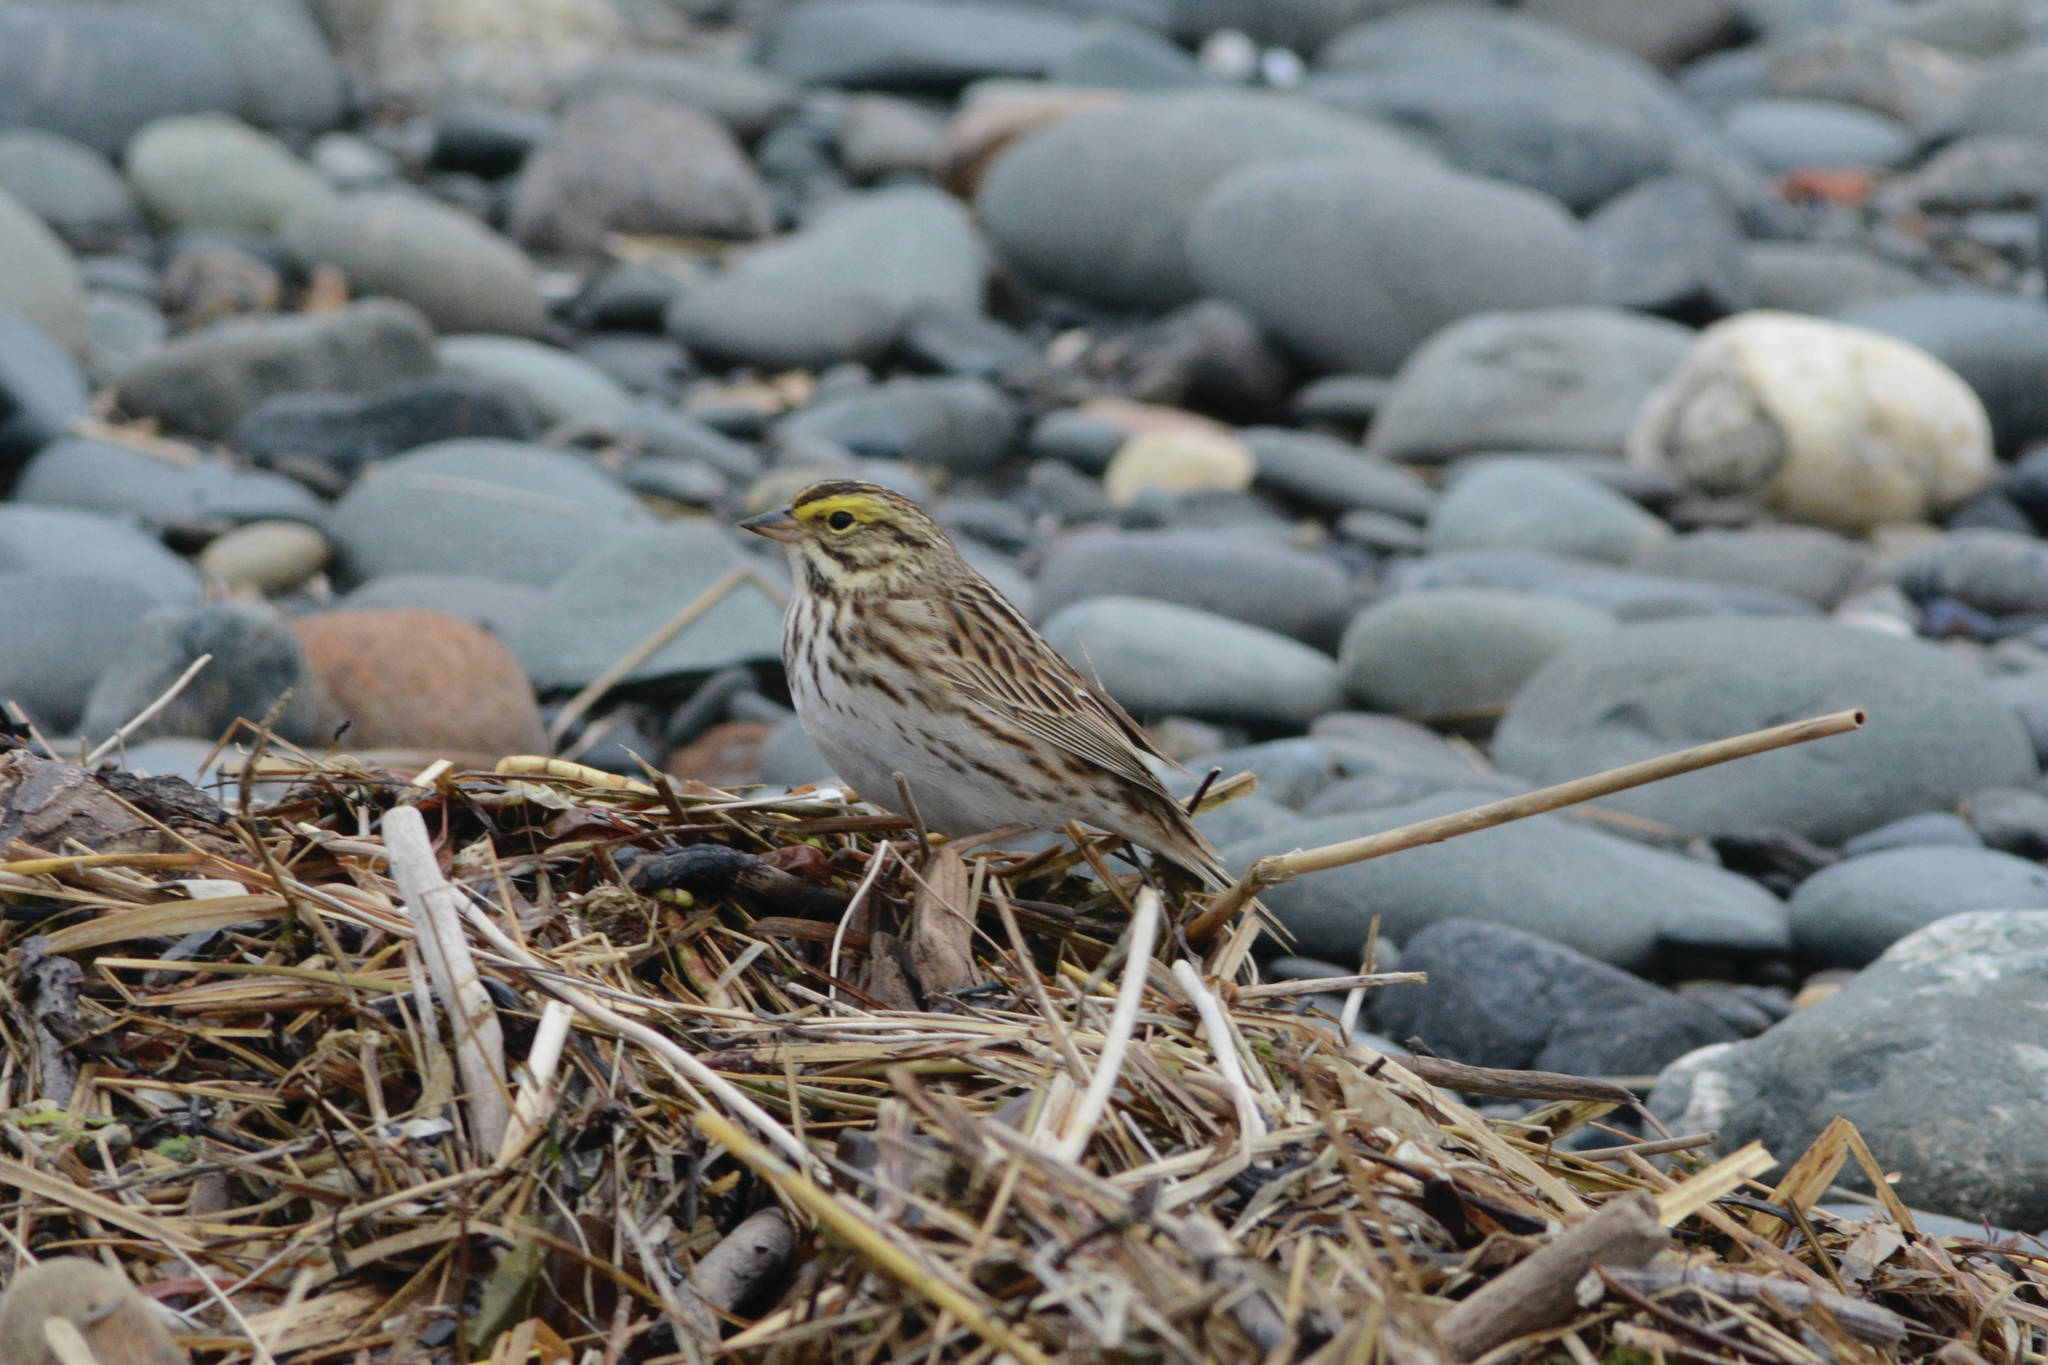 A savannah sparrow feeds along the beach near Green Timbers on the Homer Spit on Saturday, May 8, 2021, in Homer, Alaska. (Photo by Michael Armstrong/Homer News)